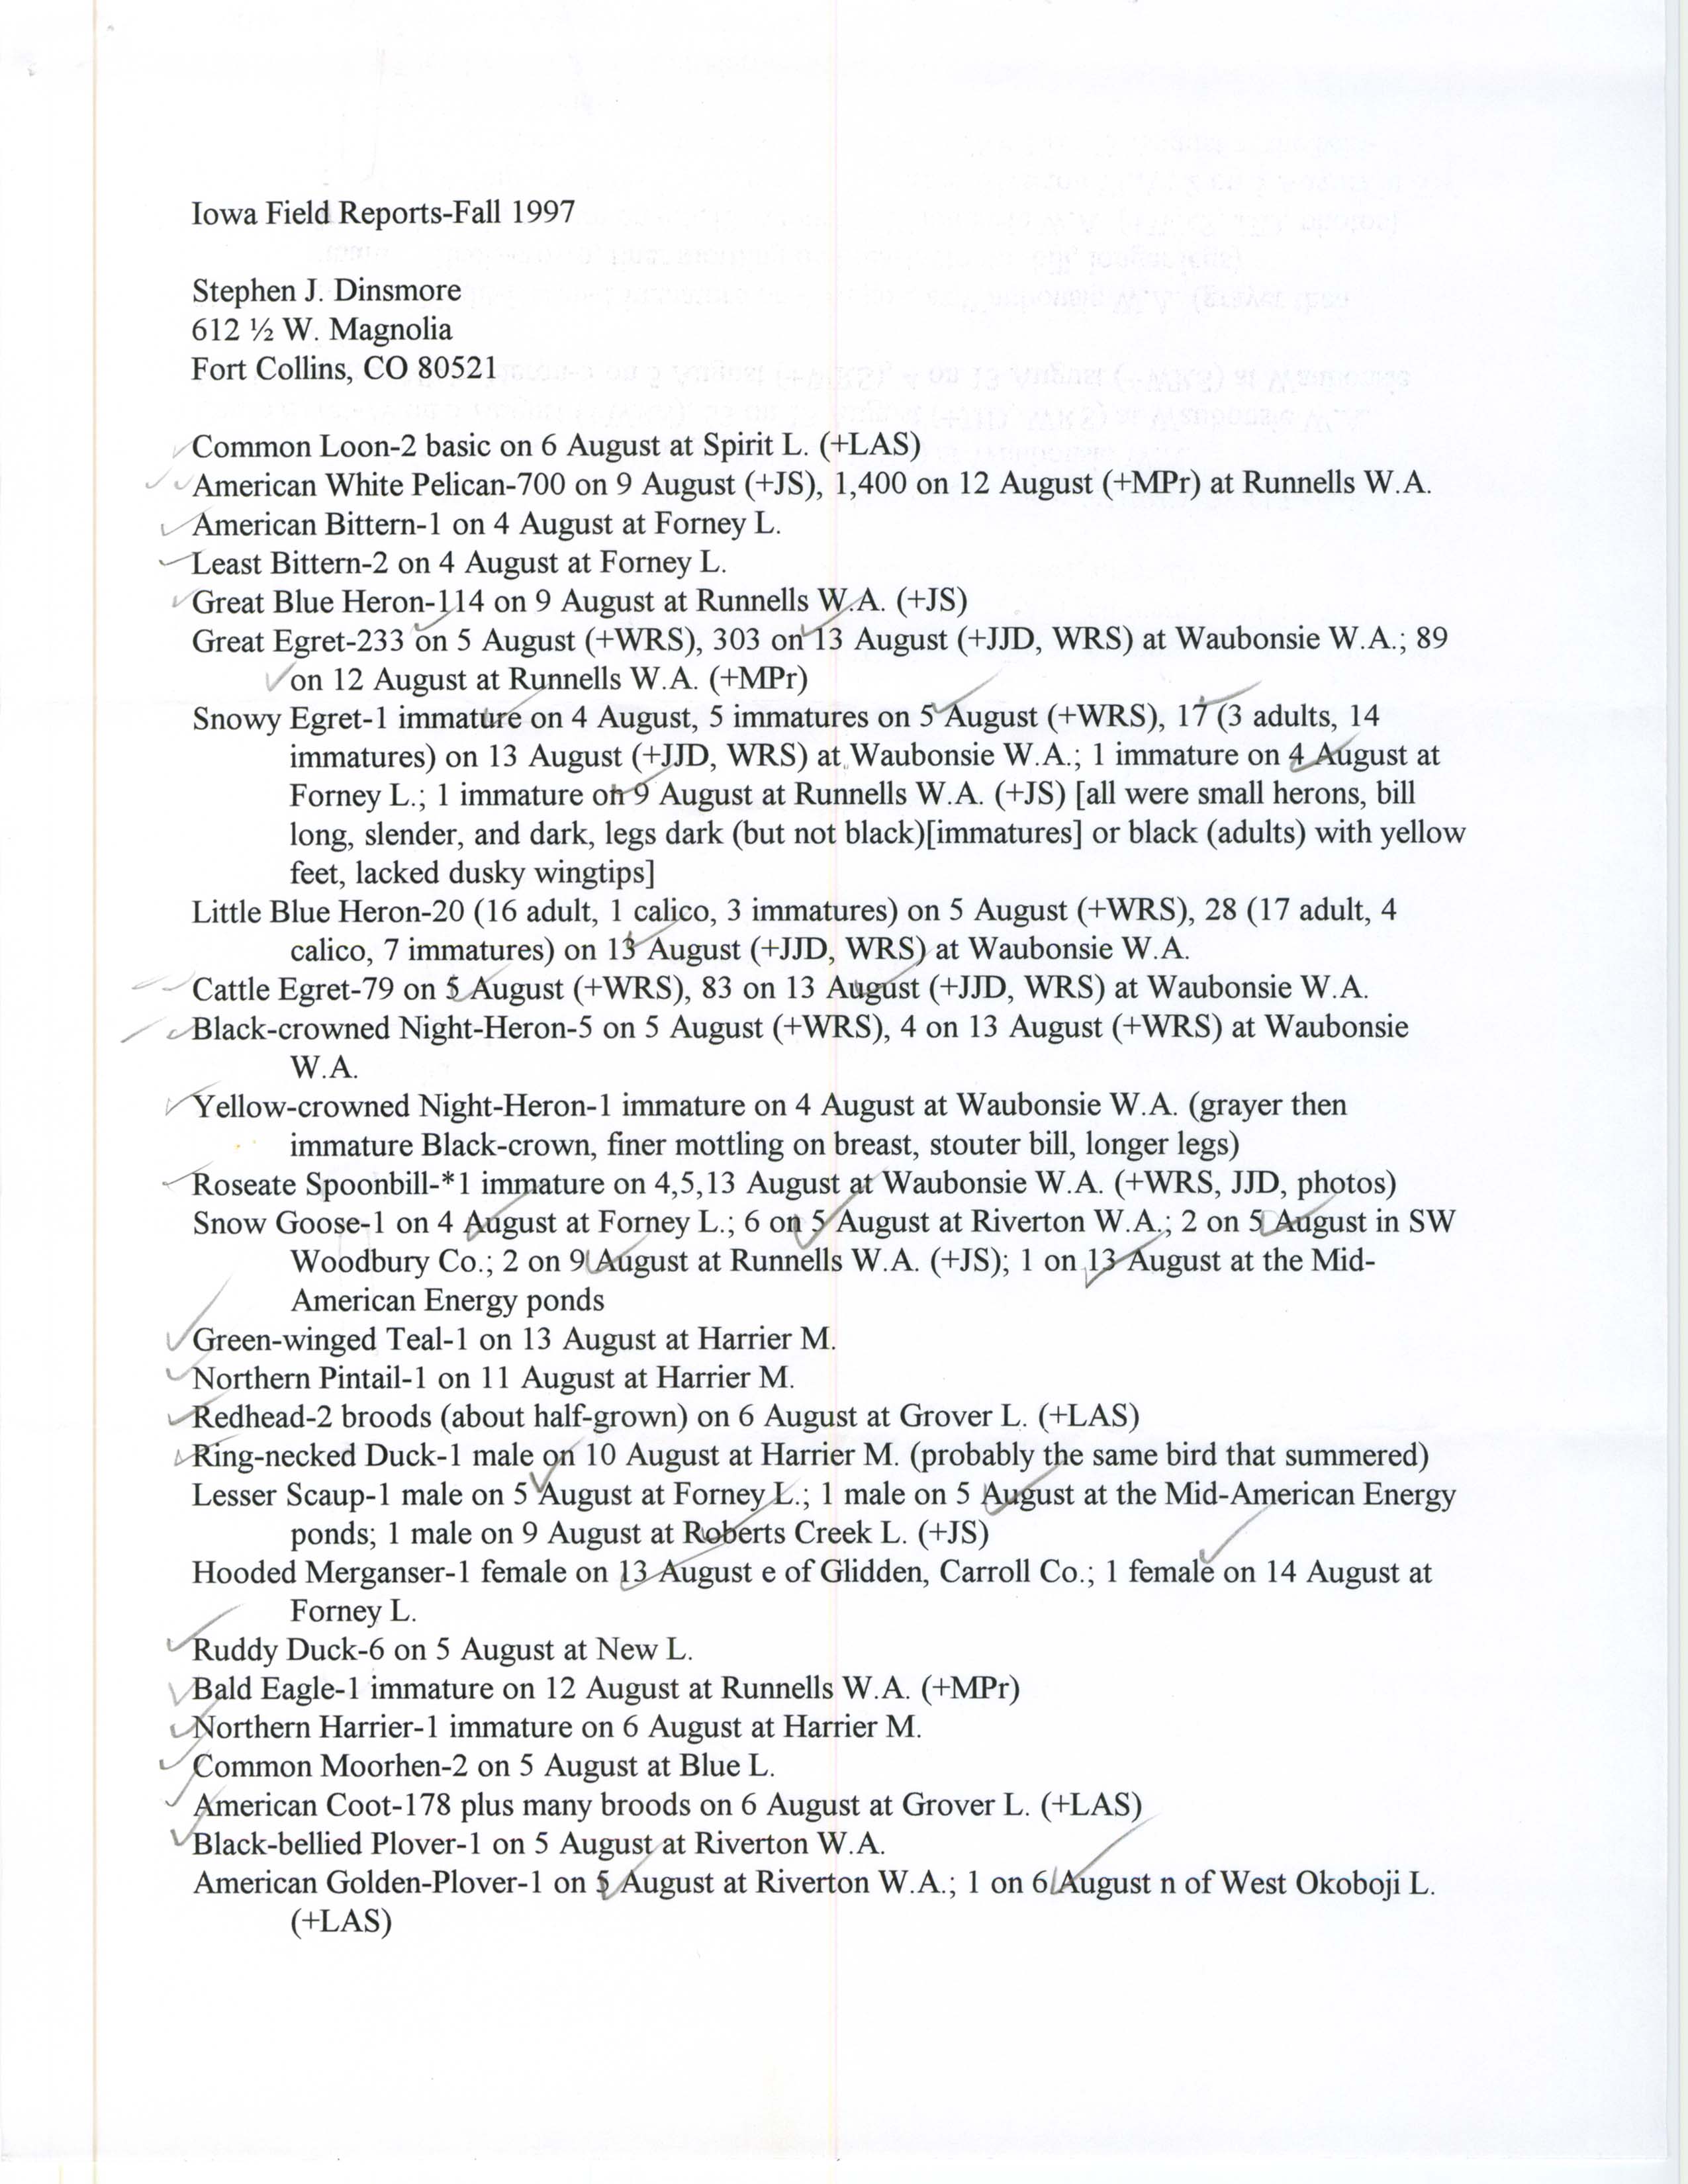 Iowa field reports contributed by Stephen J. Dinsmore, fall 1997